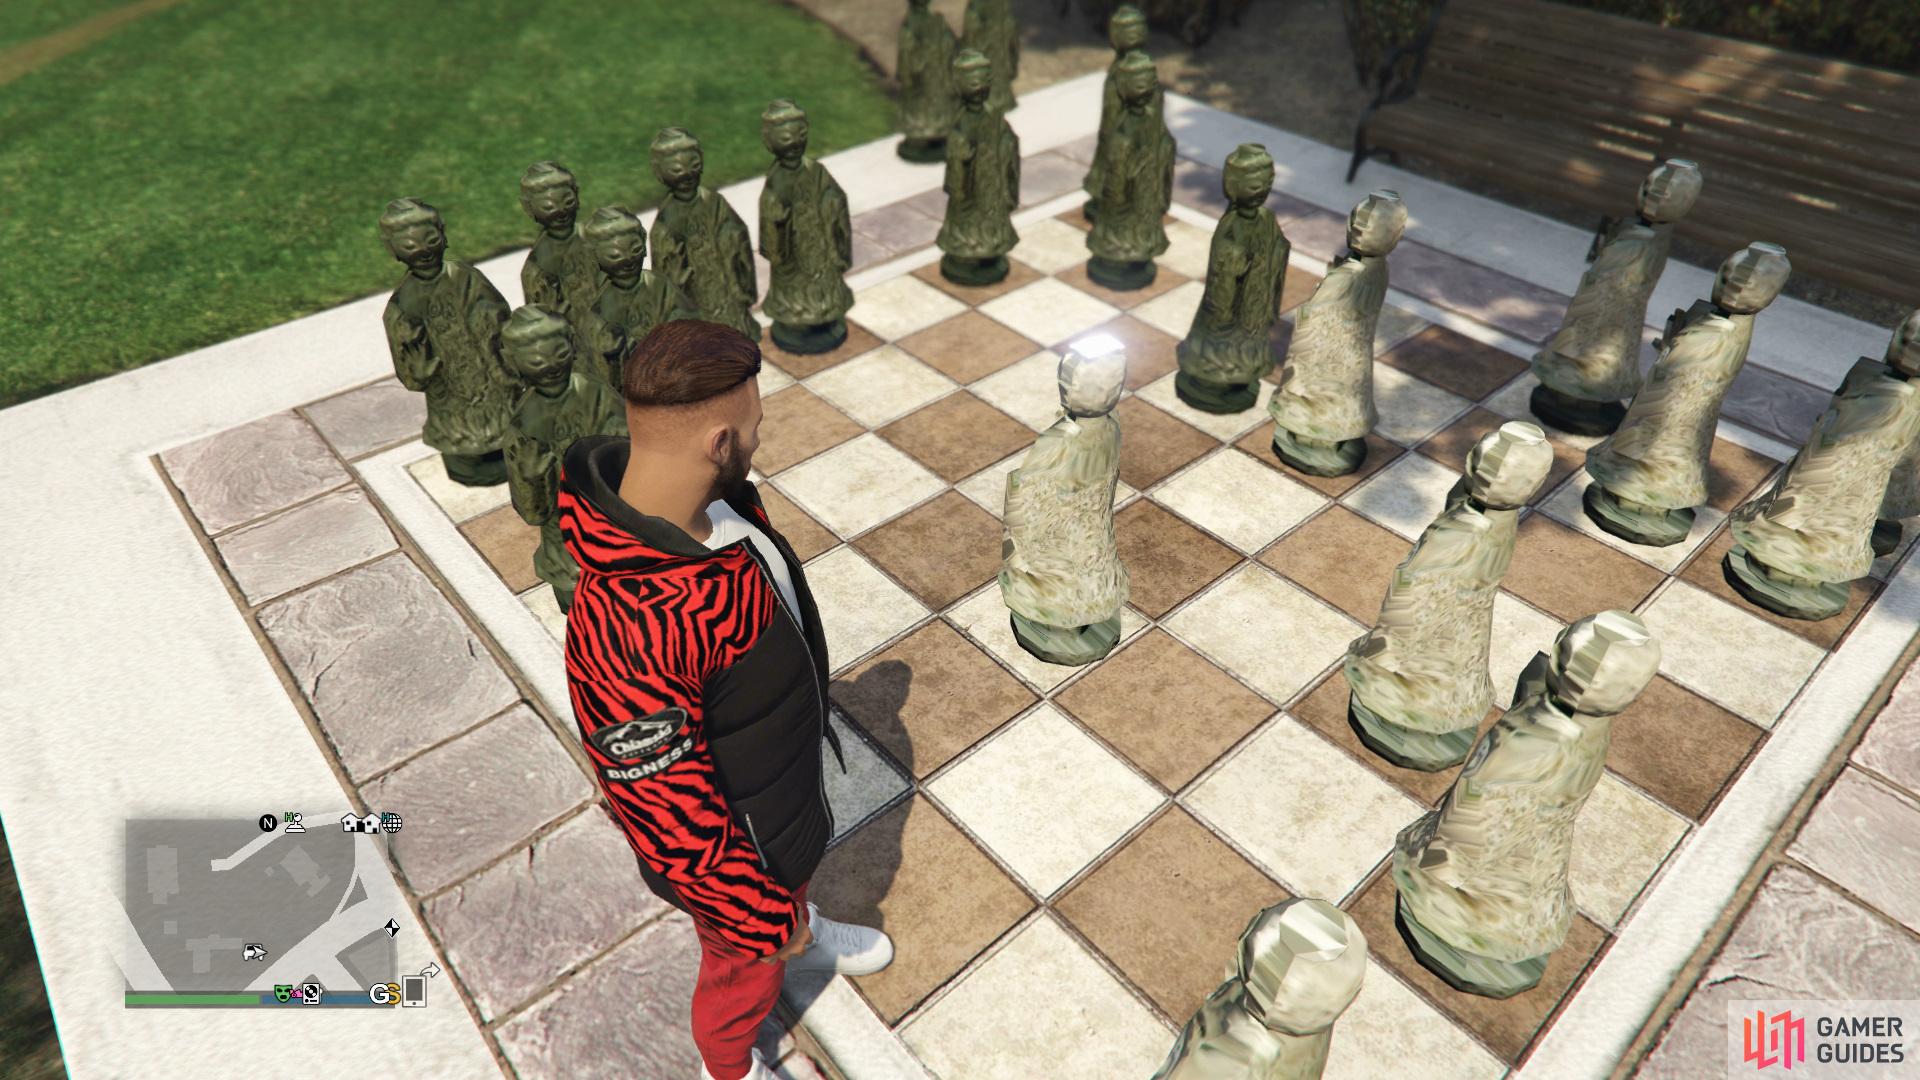 to find the Playing Card sitting on a chess piece.